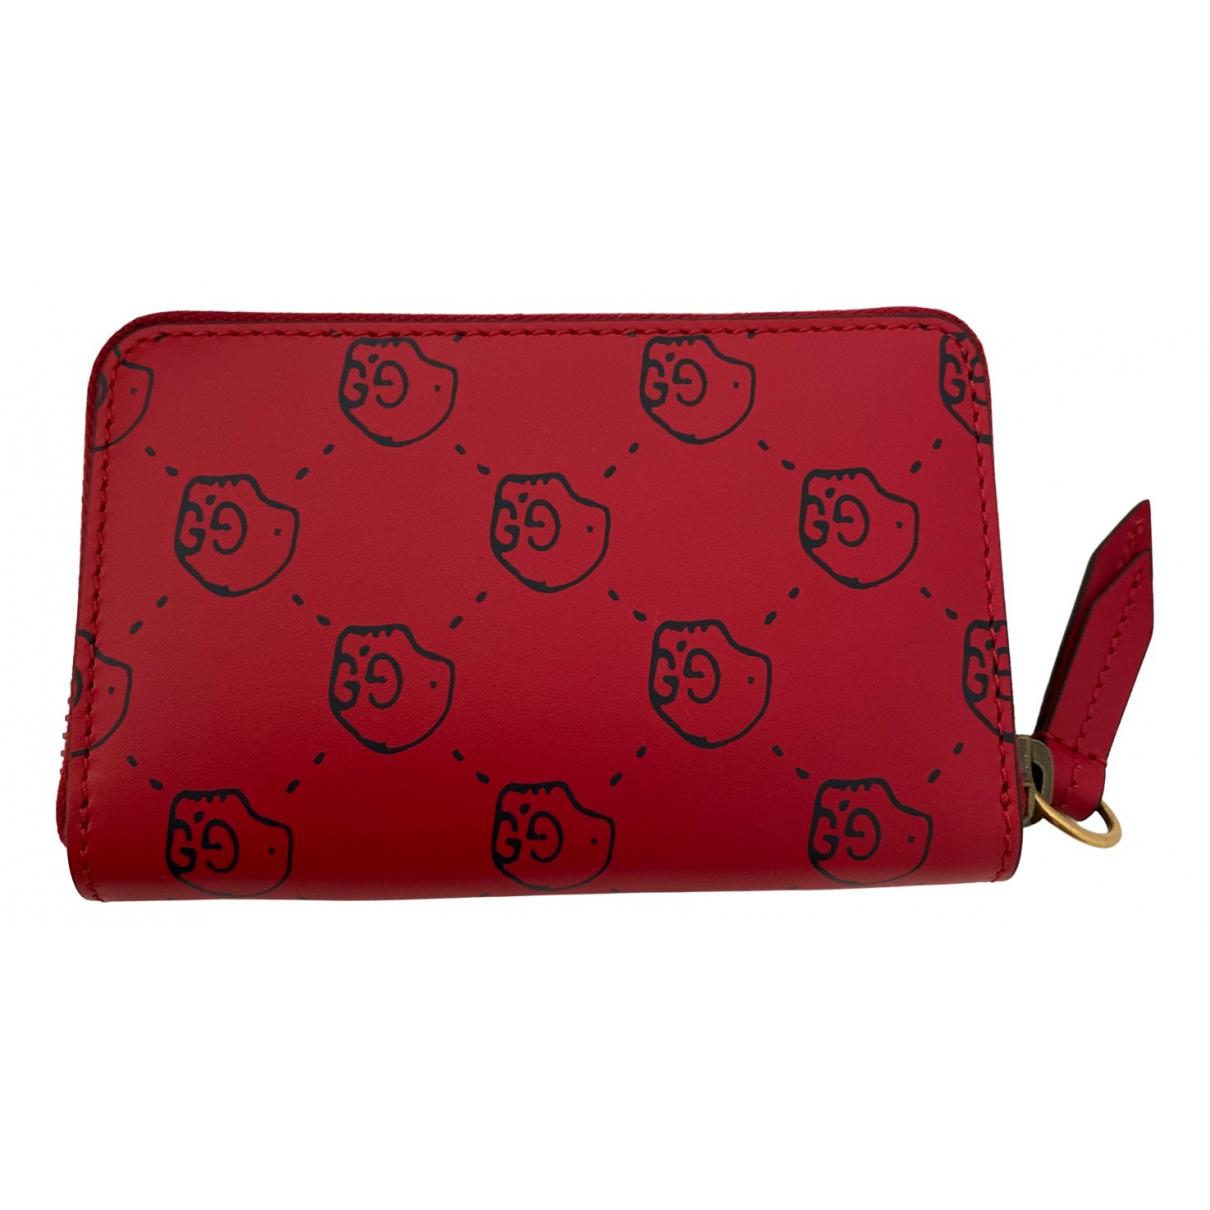 GG Blooms leather purse Gucci